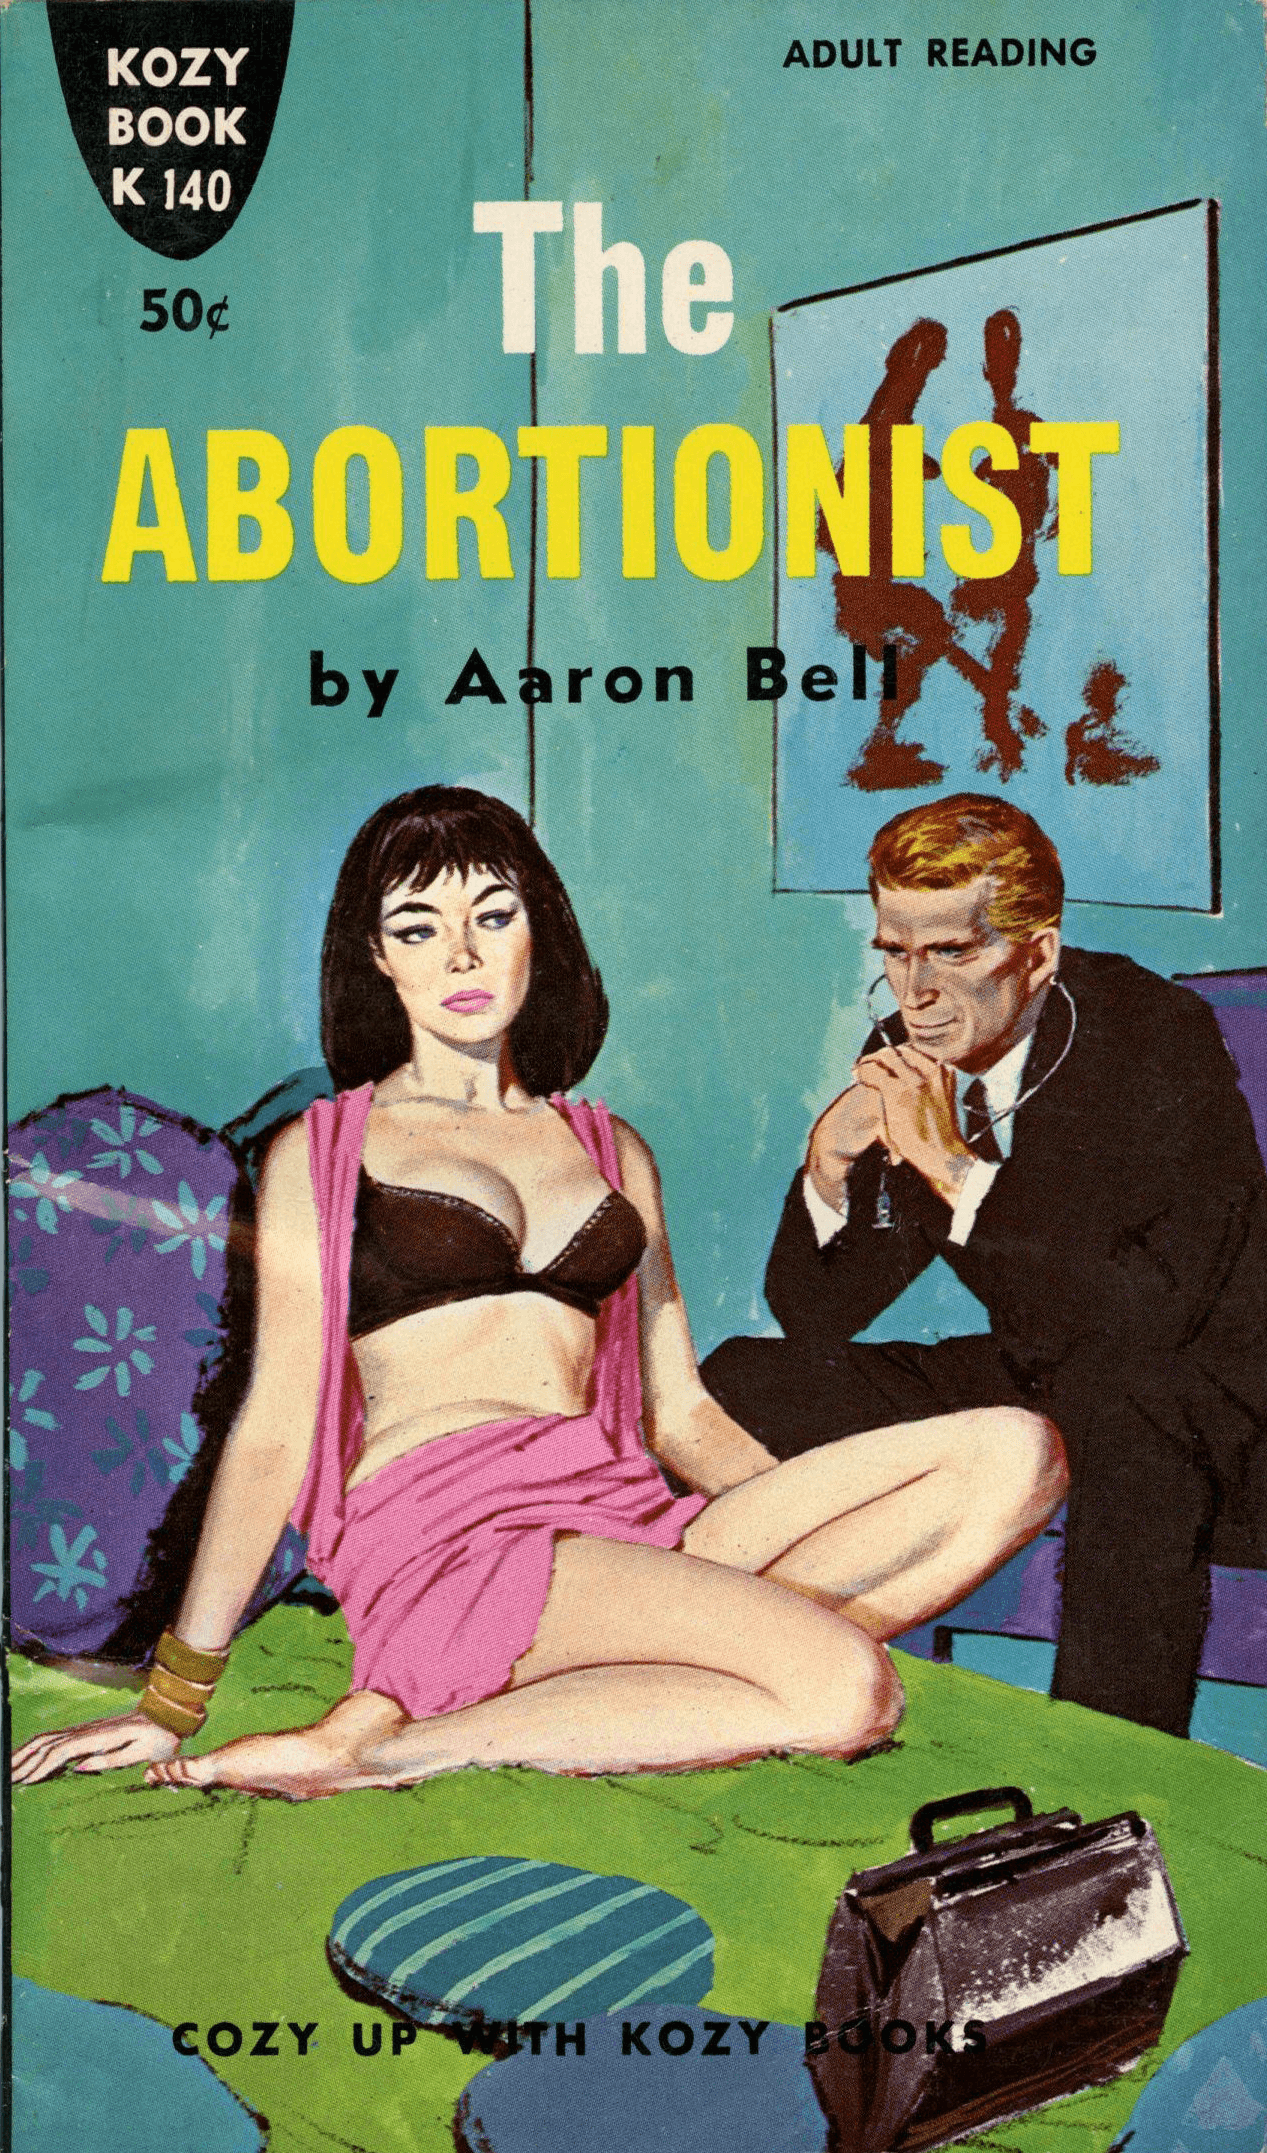 The cover of the book, “The Abortionist.” On the cover a woman sits on the edge of a bed in a half-off pink dress. Next to the bed sits a man in a black suit and tie hunched on a chair next to her. He stares at the woman, a stethoscope hangs from his neck, and a black medical bag is open at the end of the bed.